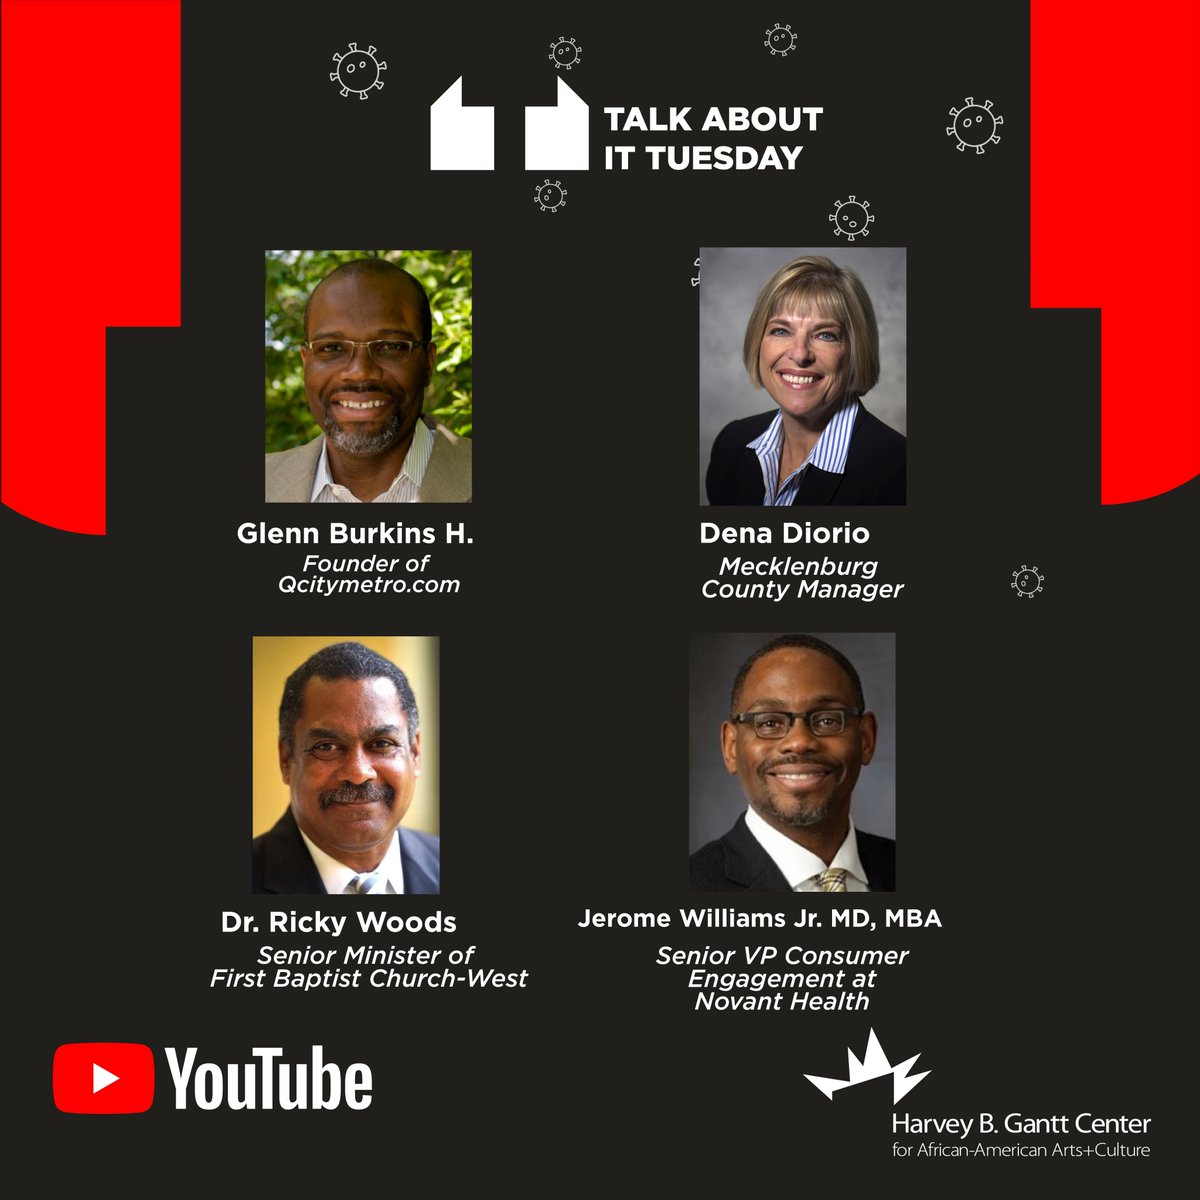 For this special Talk About It Tuesday,  @glennburkins --Founder & Publisher of  @Qcitymetro -- will lead a virtual expert panel discussion about the underlying causes of this disparity and the resources required to improve the health outcomes within communities of color.